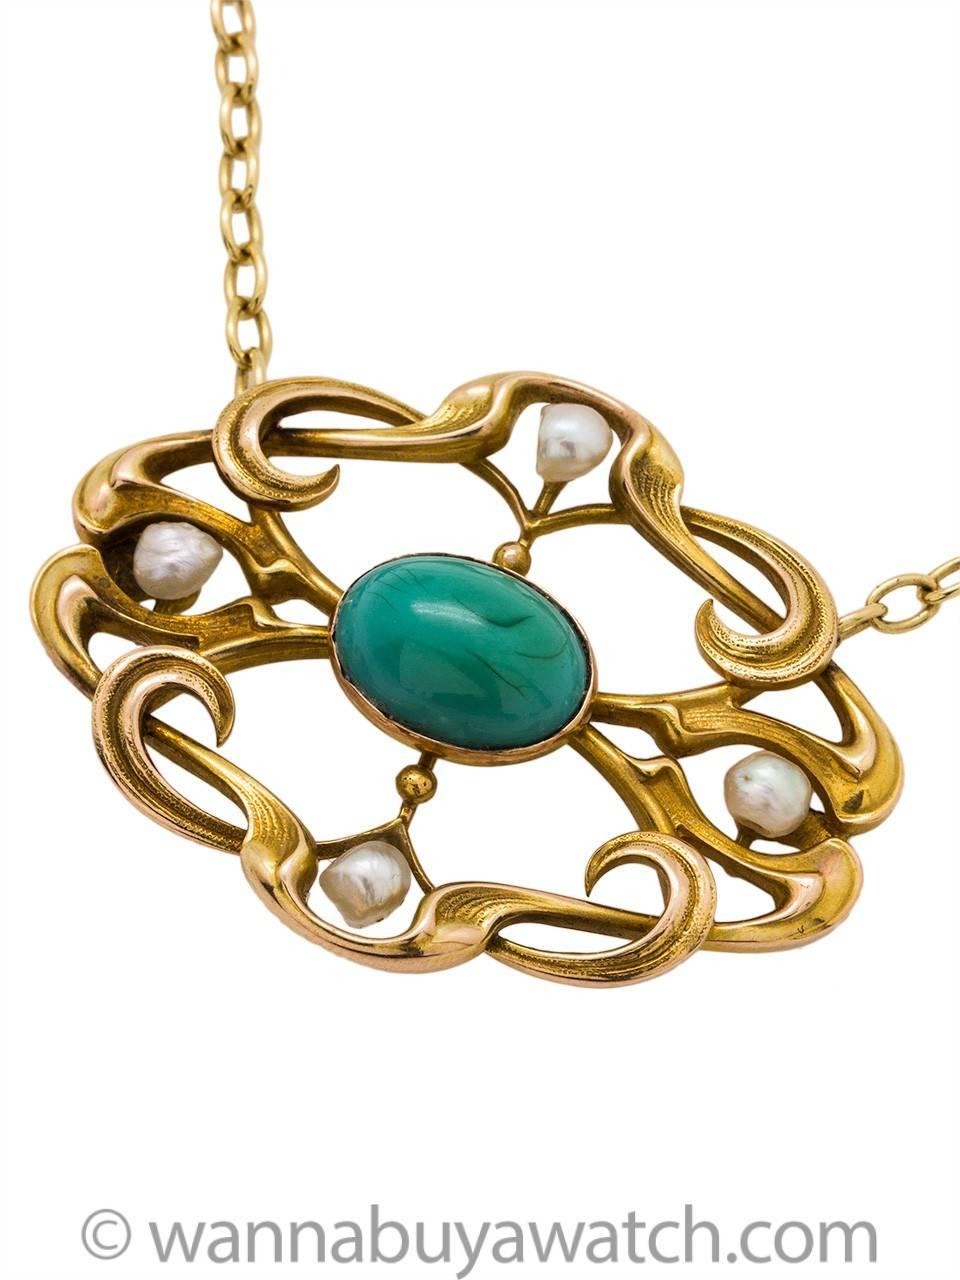 Art nouveau necklace crafted in a 14k yellow gold featuring 4 natural pearls approx 4mm each and bezel set. 9 x 12mm oval blue turquoise center set in curvaceous open frame work. 28 x 38mm on 18" oval link chain. Very lovely antique